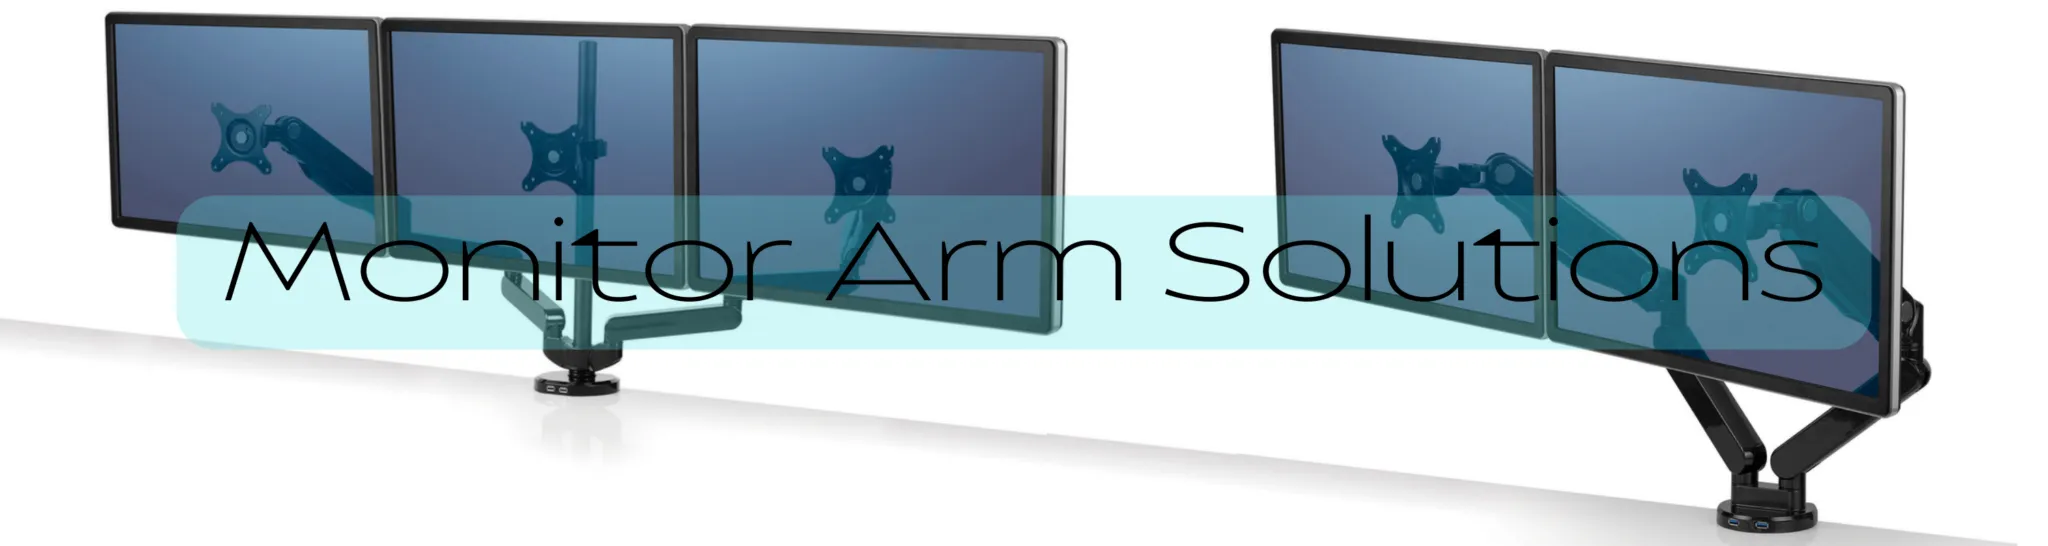 Monitor-Arm-Solutions--2048x546